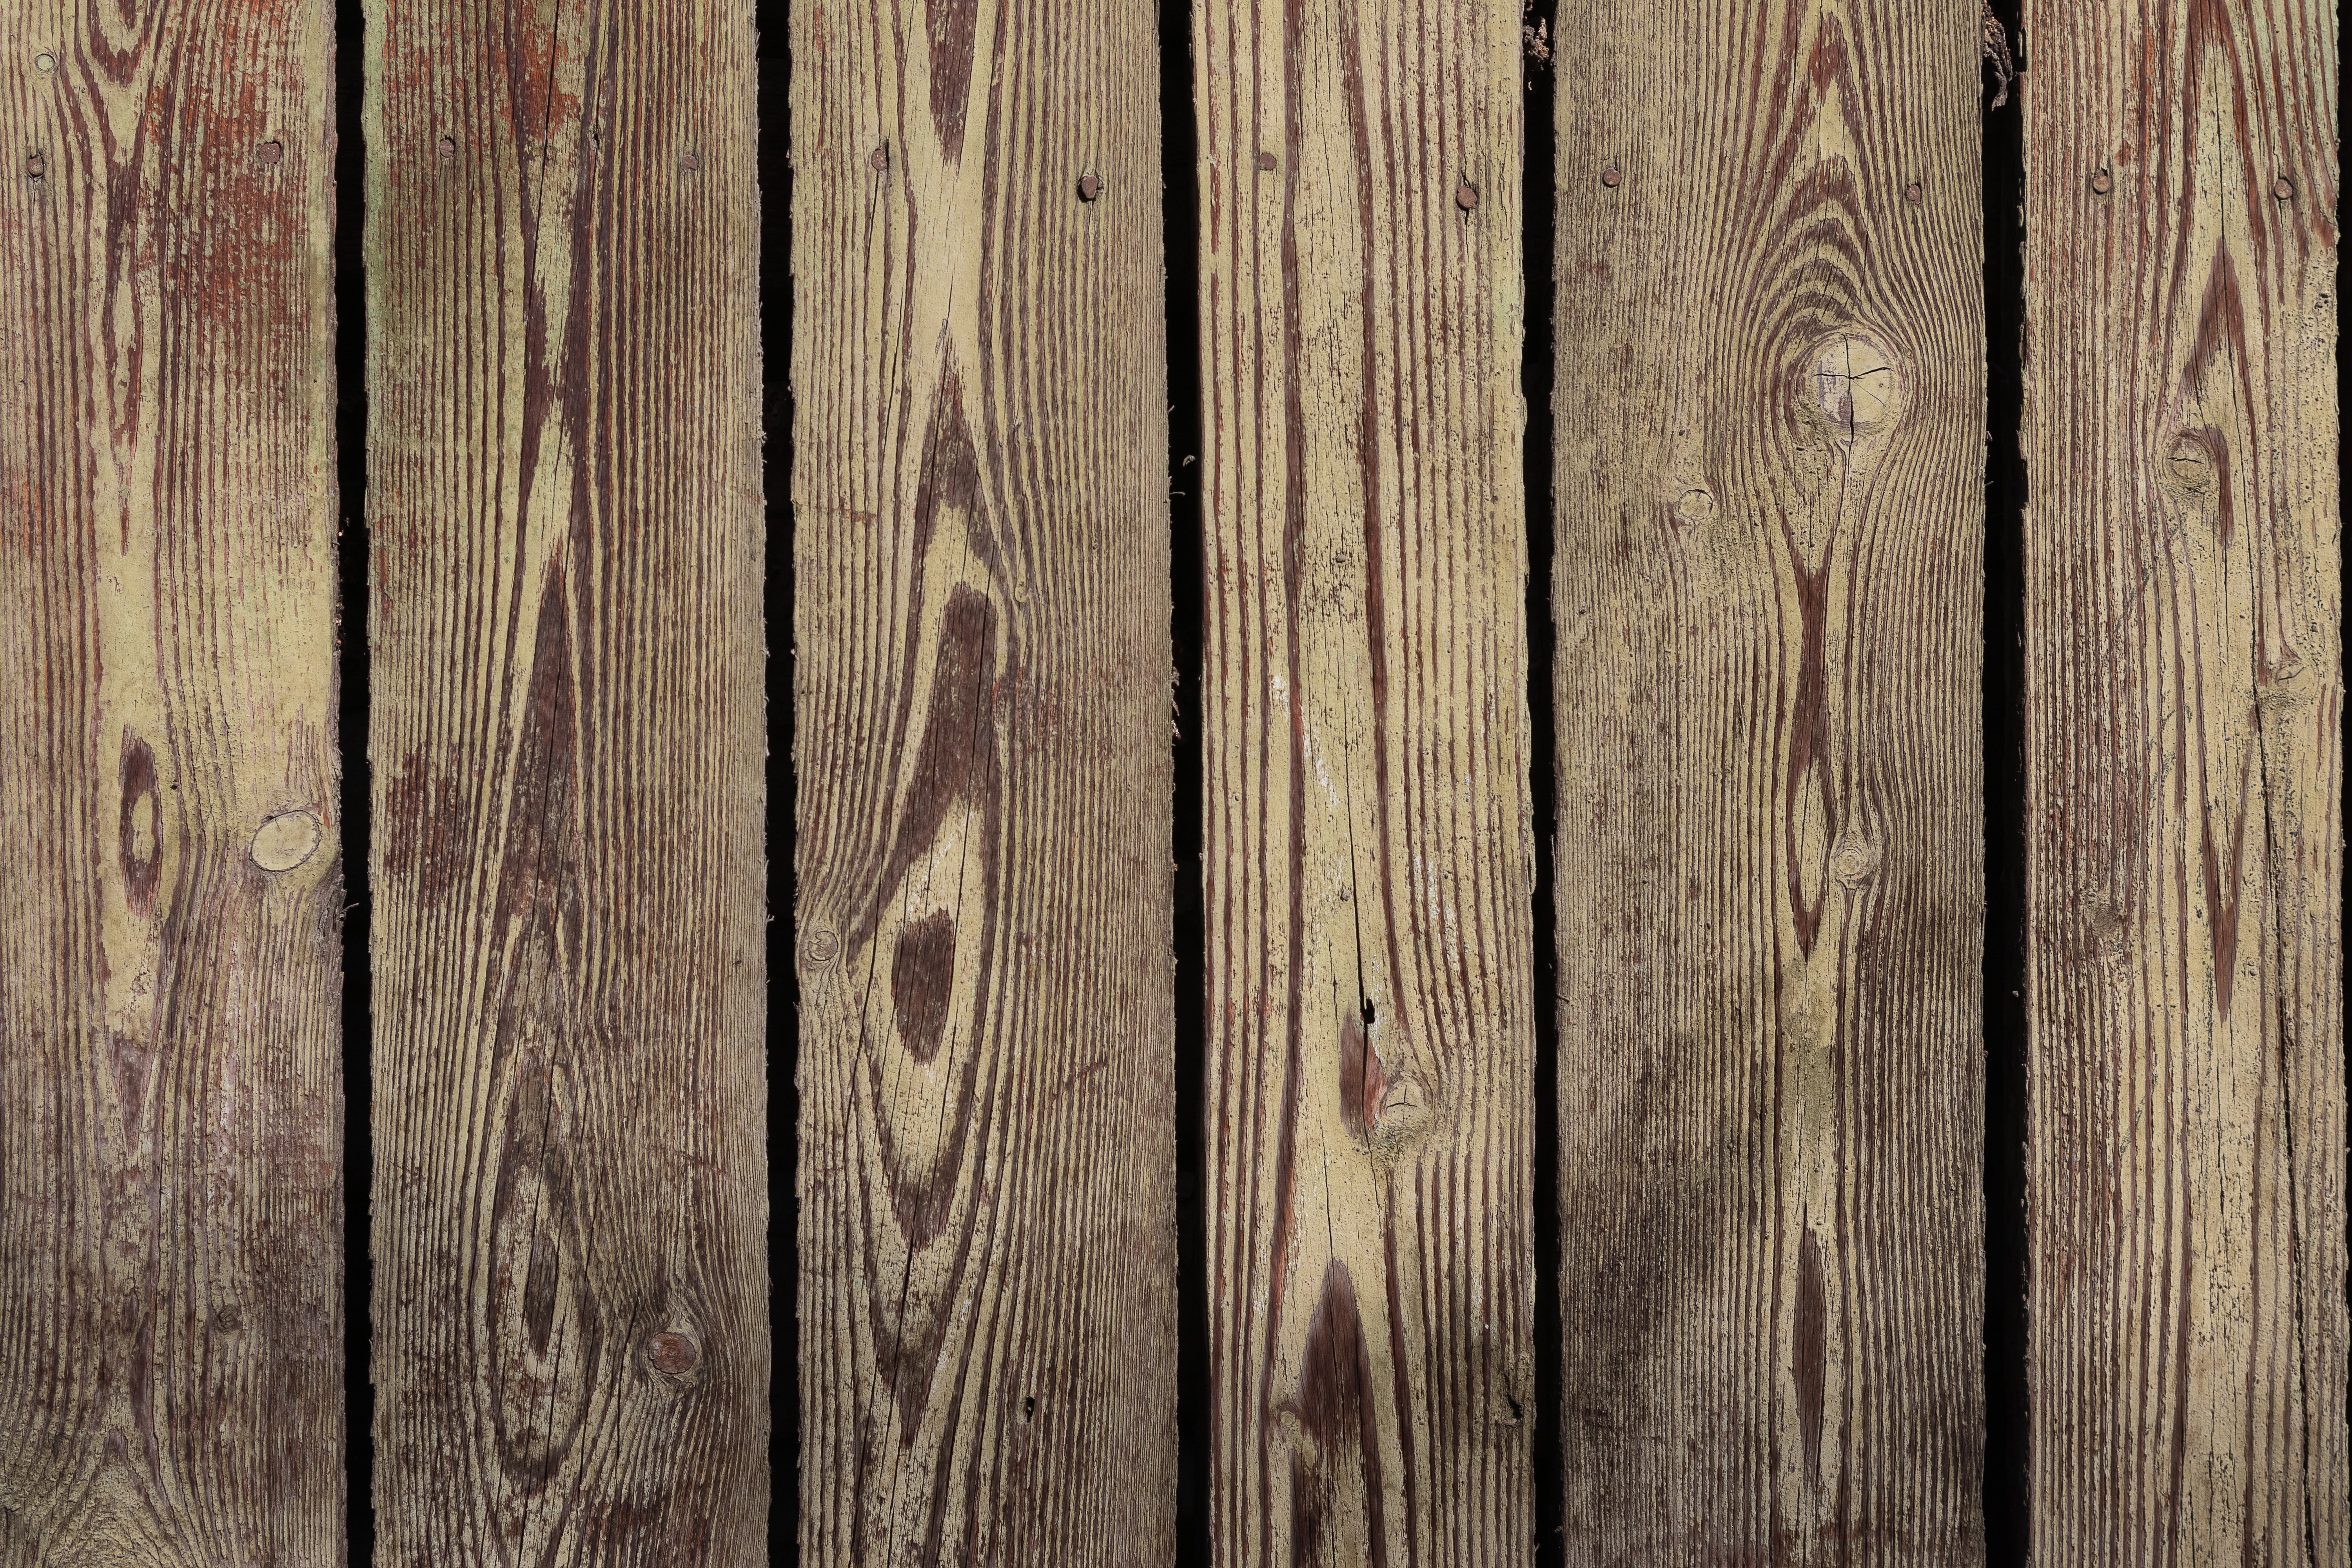 wood, wooden, texture, textures, surface, planks, board FHD, 4K, UHD